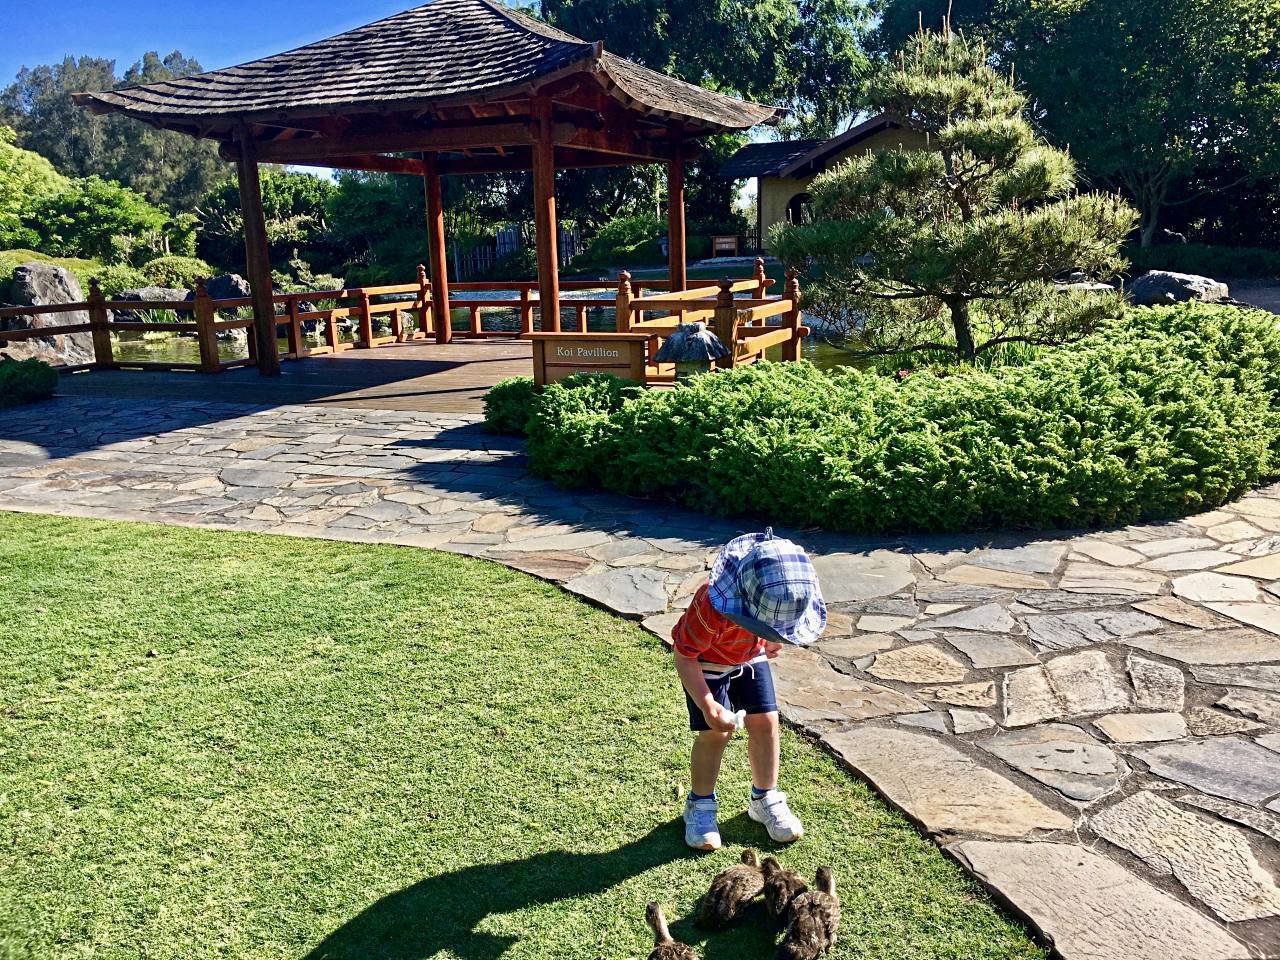 A child feeds ducks in front of the Koi Pavillion at the Edogawa Commemorative Garden - part of the Gosford Regional Gallery.